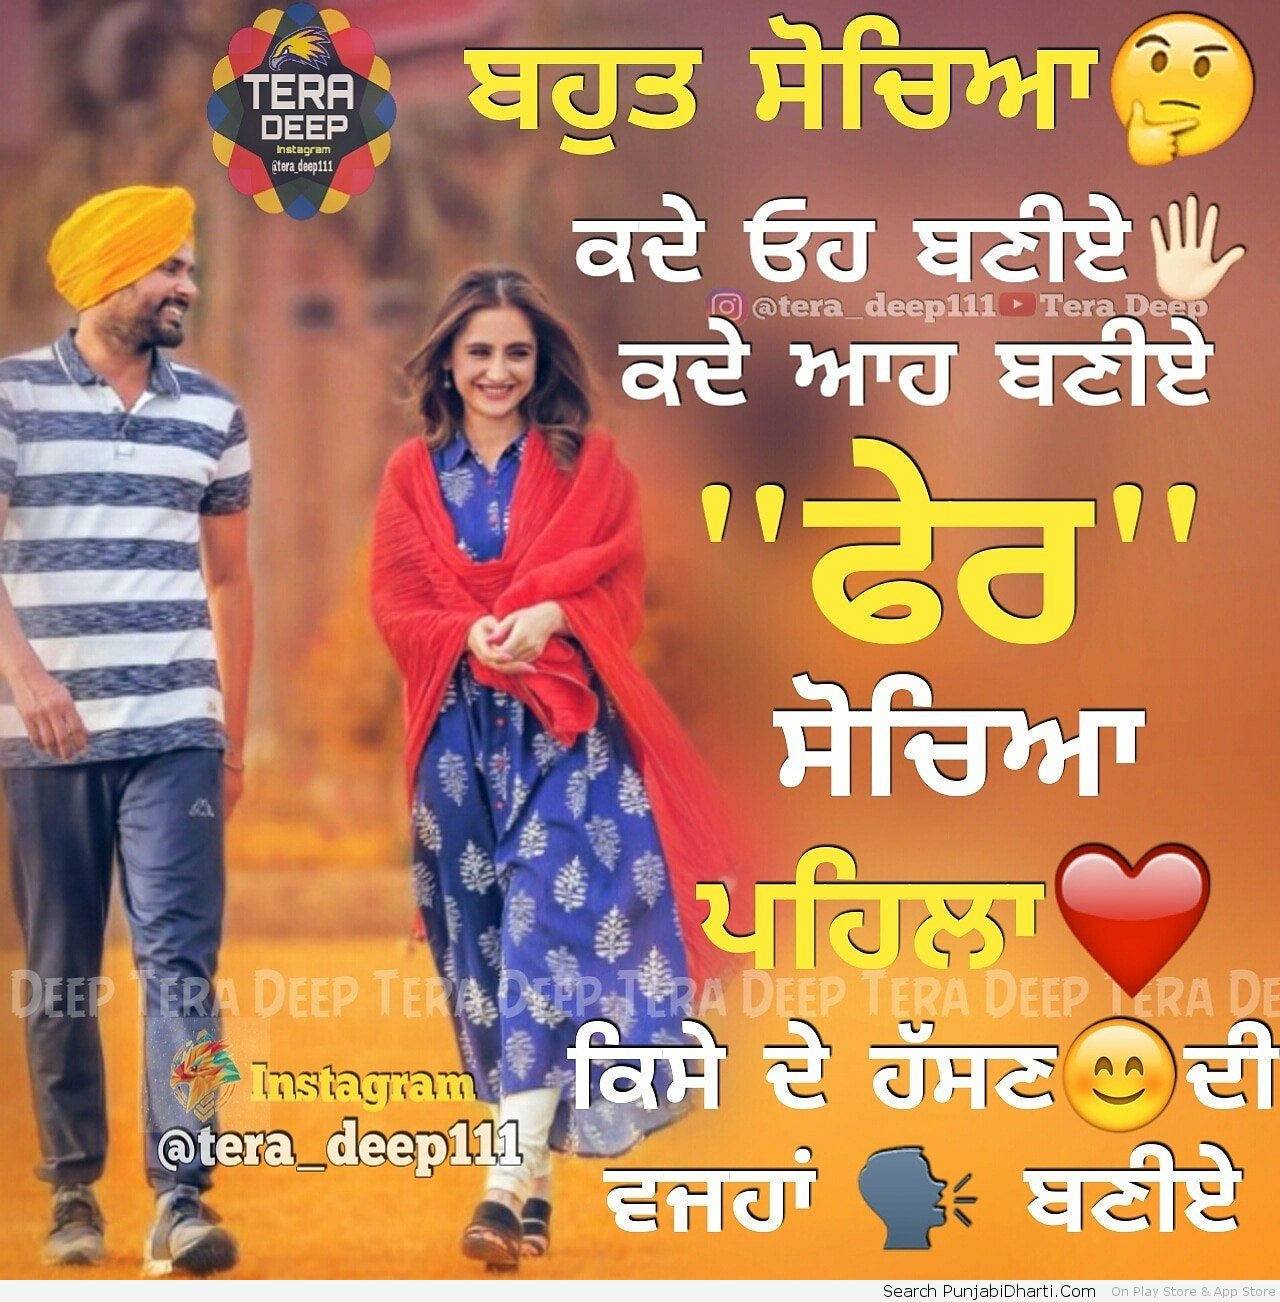 Punjabi Quotes Graphics,Images For Facebook, Whatsapp, Twitter